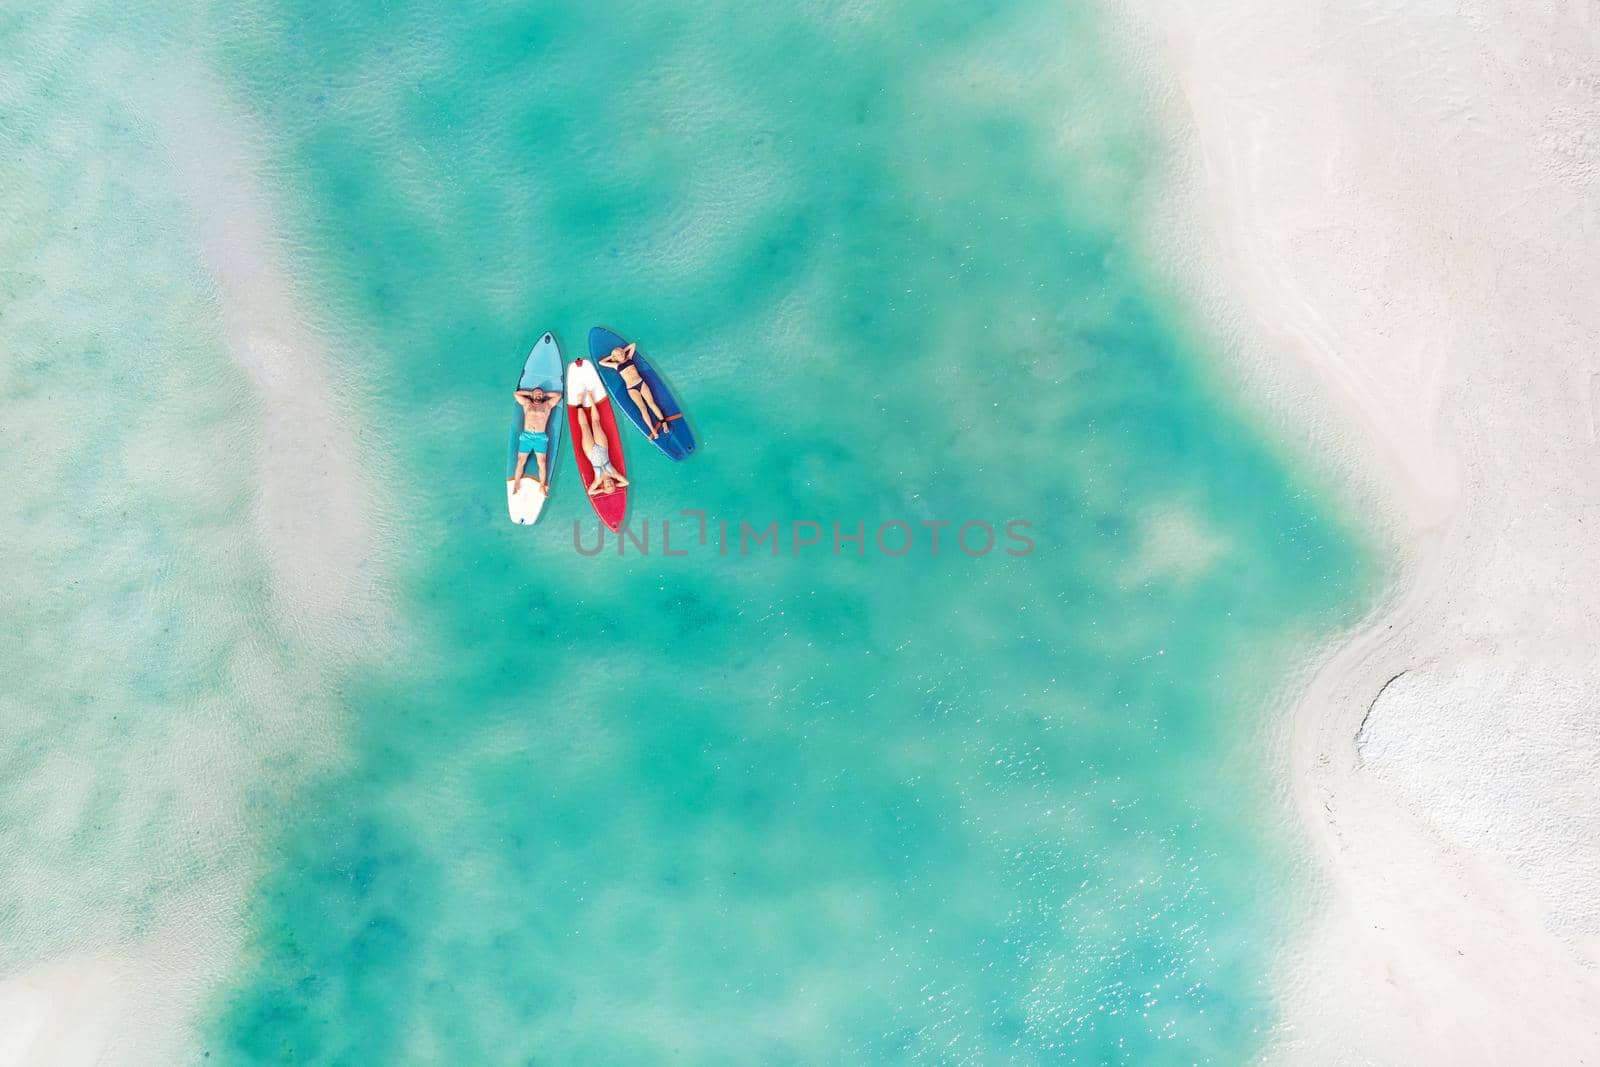 The family is resting lying on Sup boards in the turquoise sea. Three people ride sup boards in the ocean near the beach.